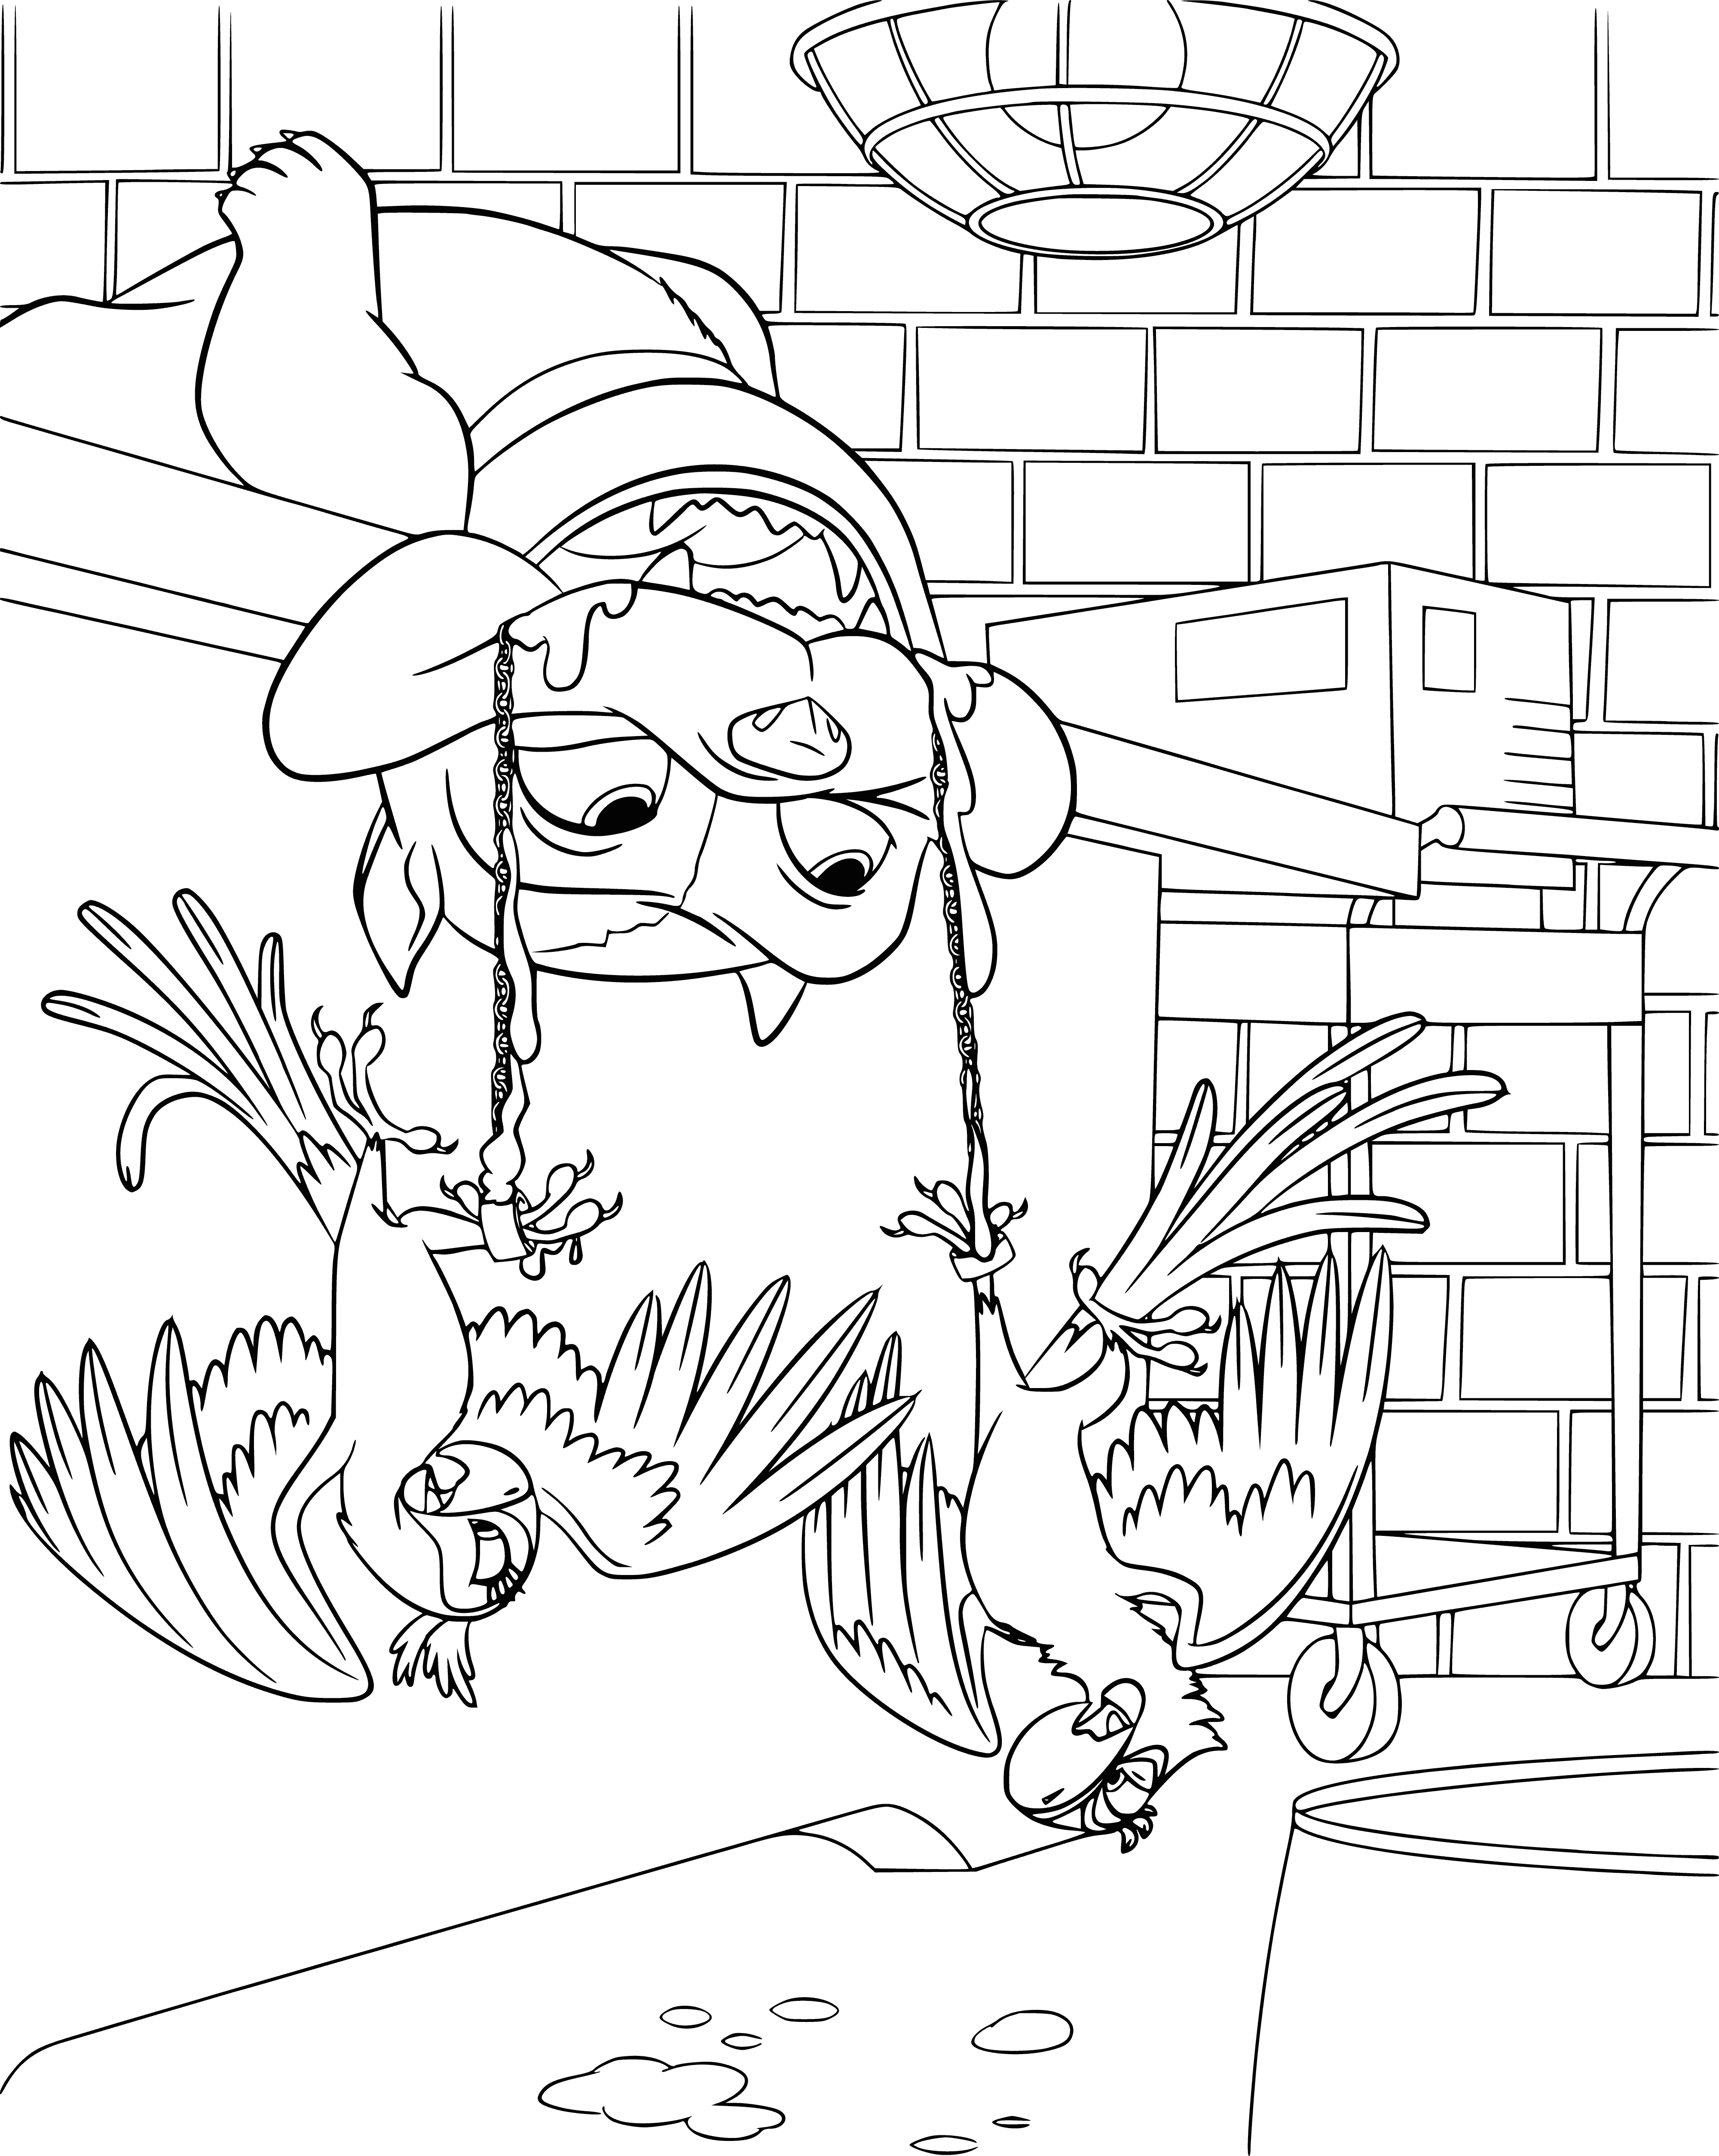 Slobbering freedom coloring page